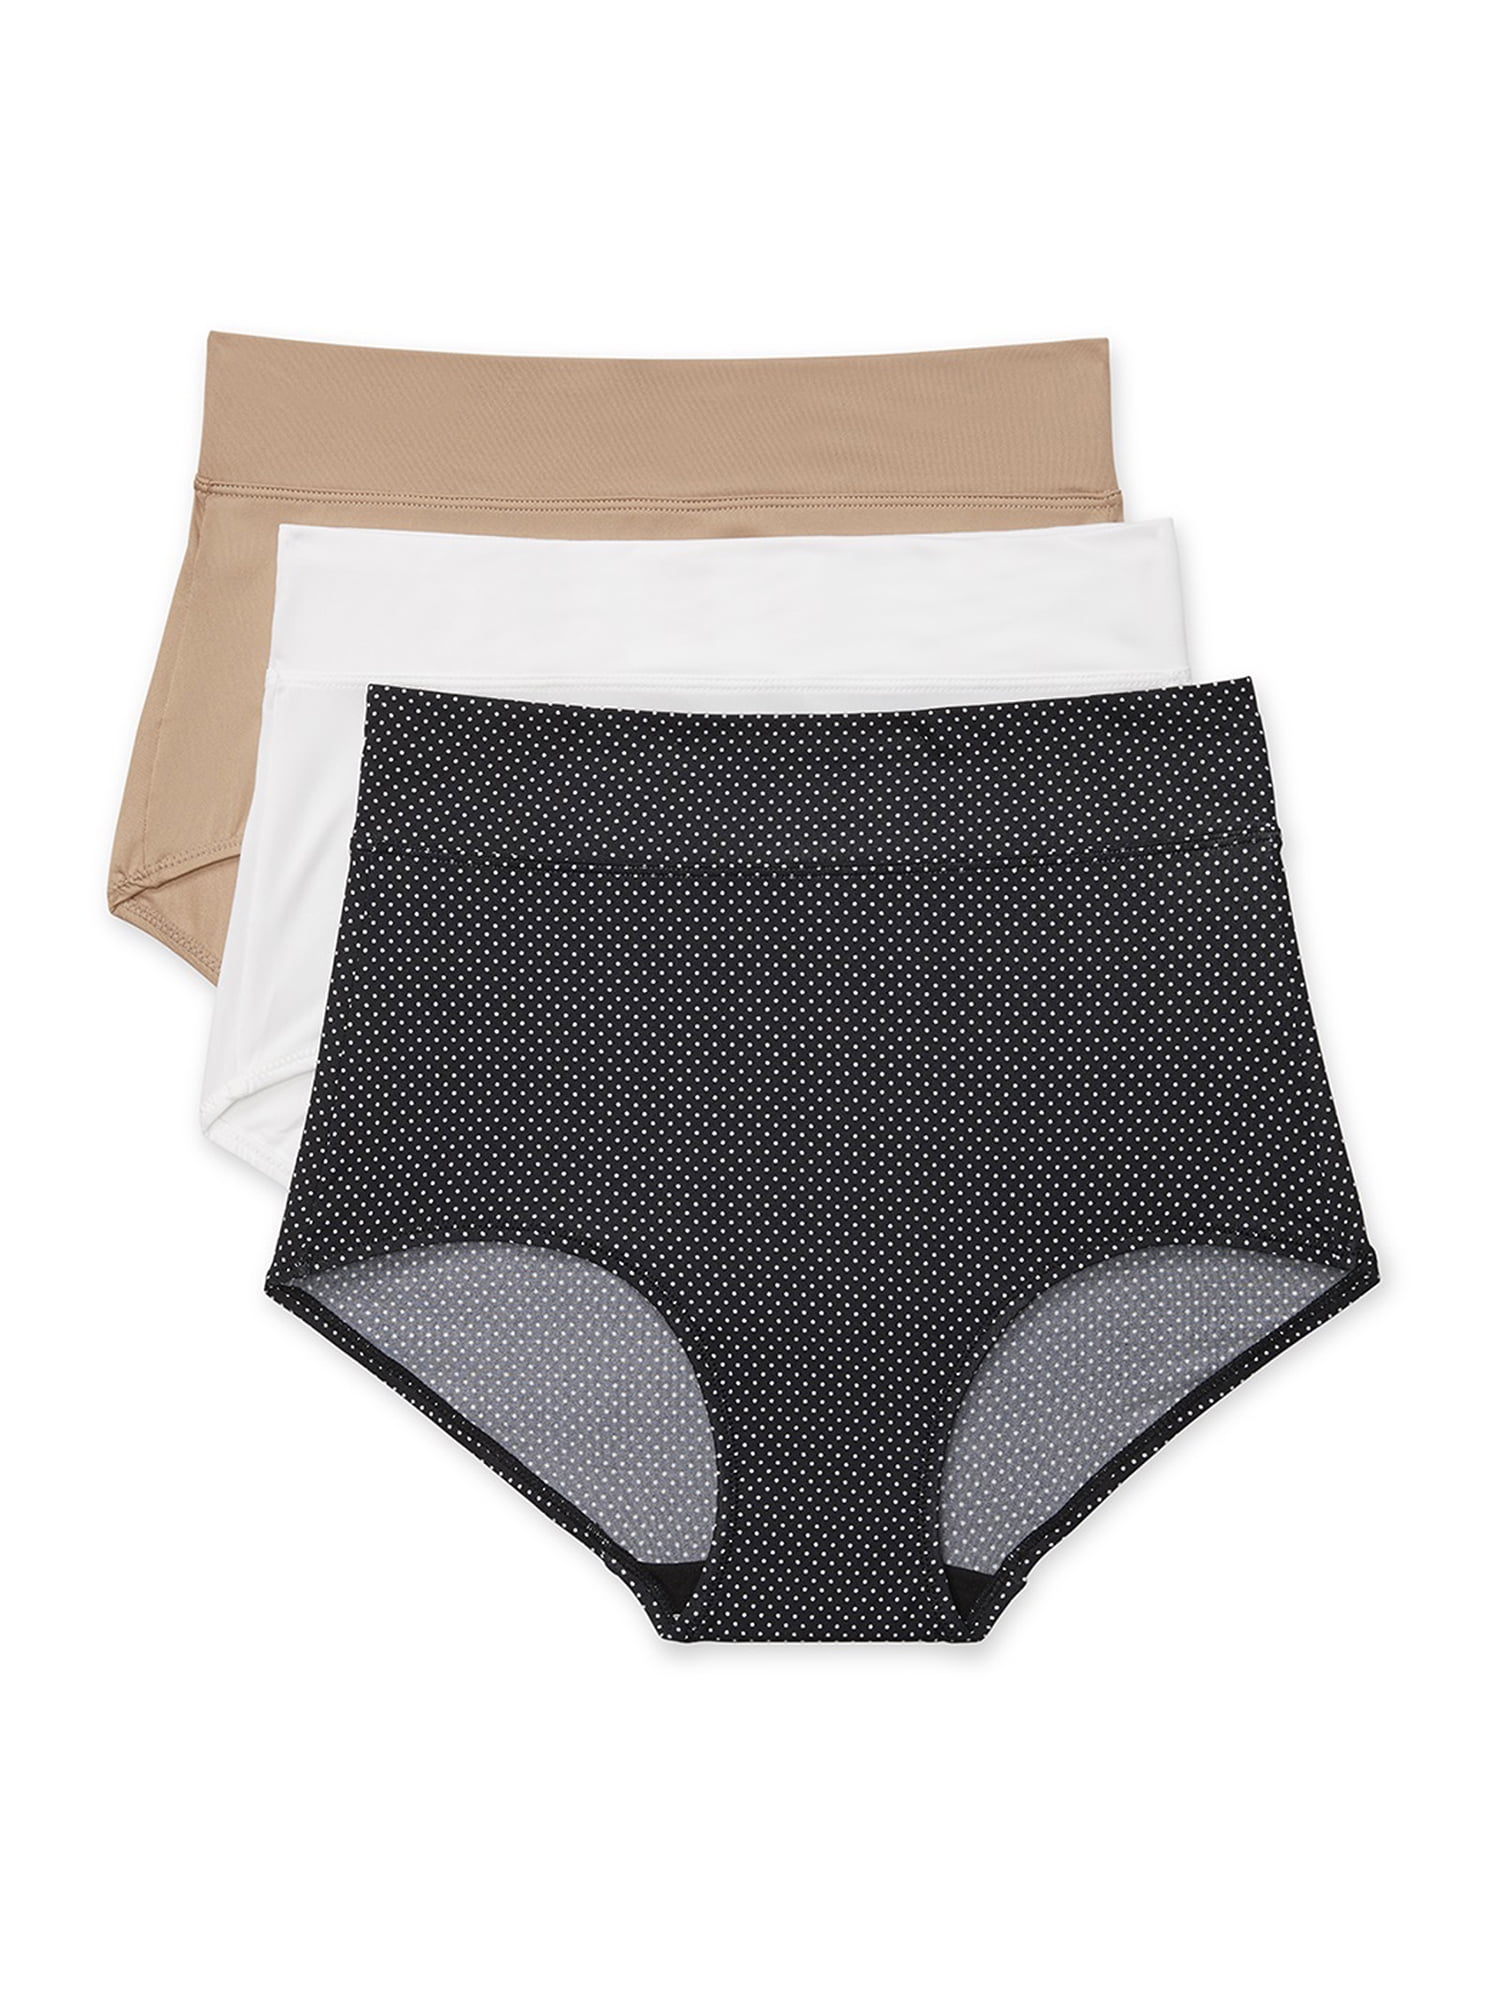 Warners Blissful Benefits Dig-Free Microfiber Brief 3-Pack RS9043W ...